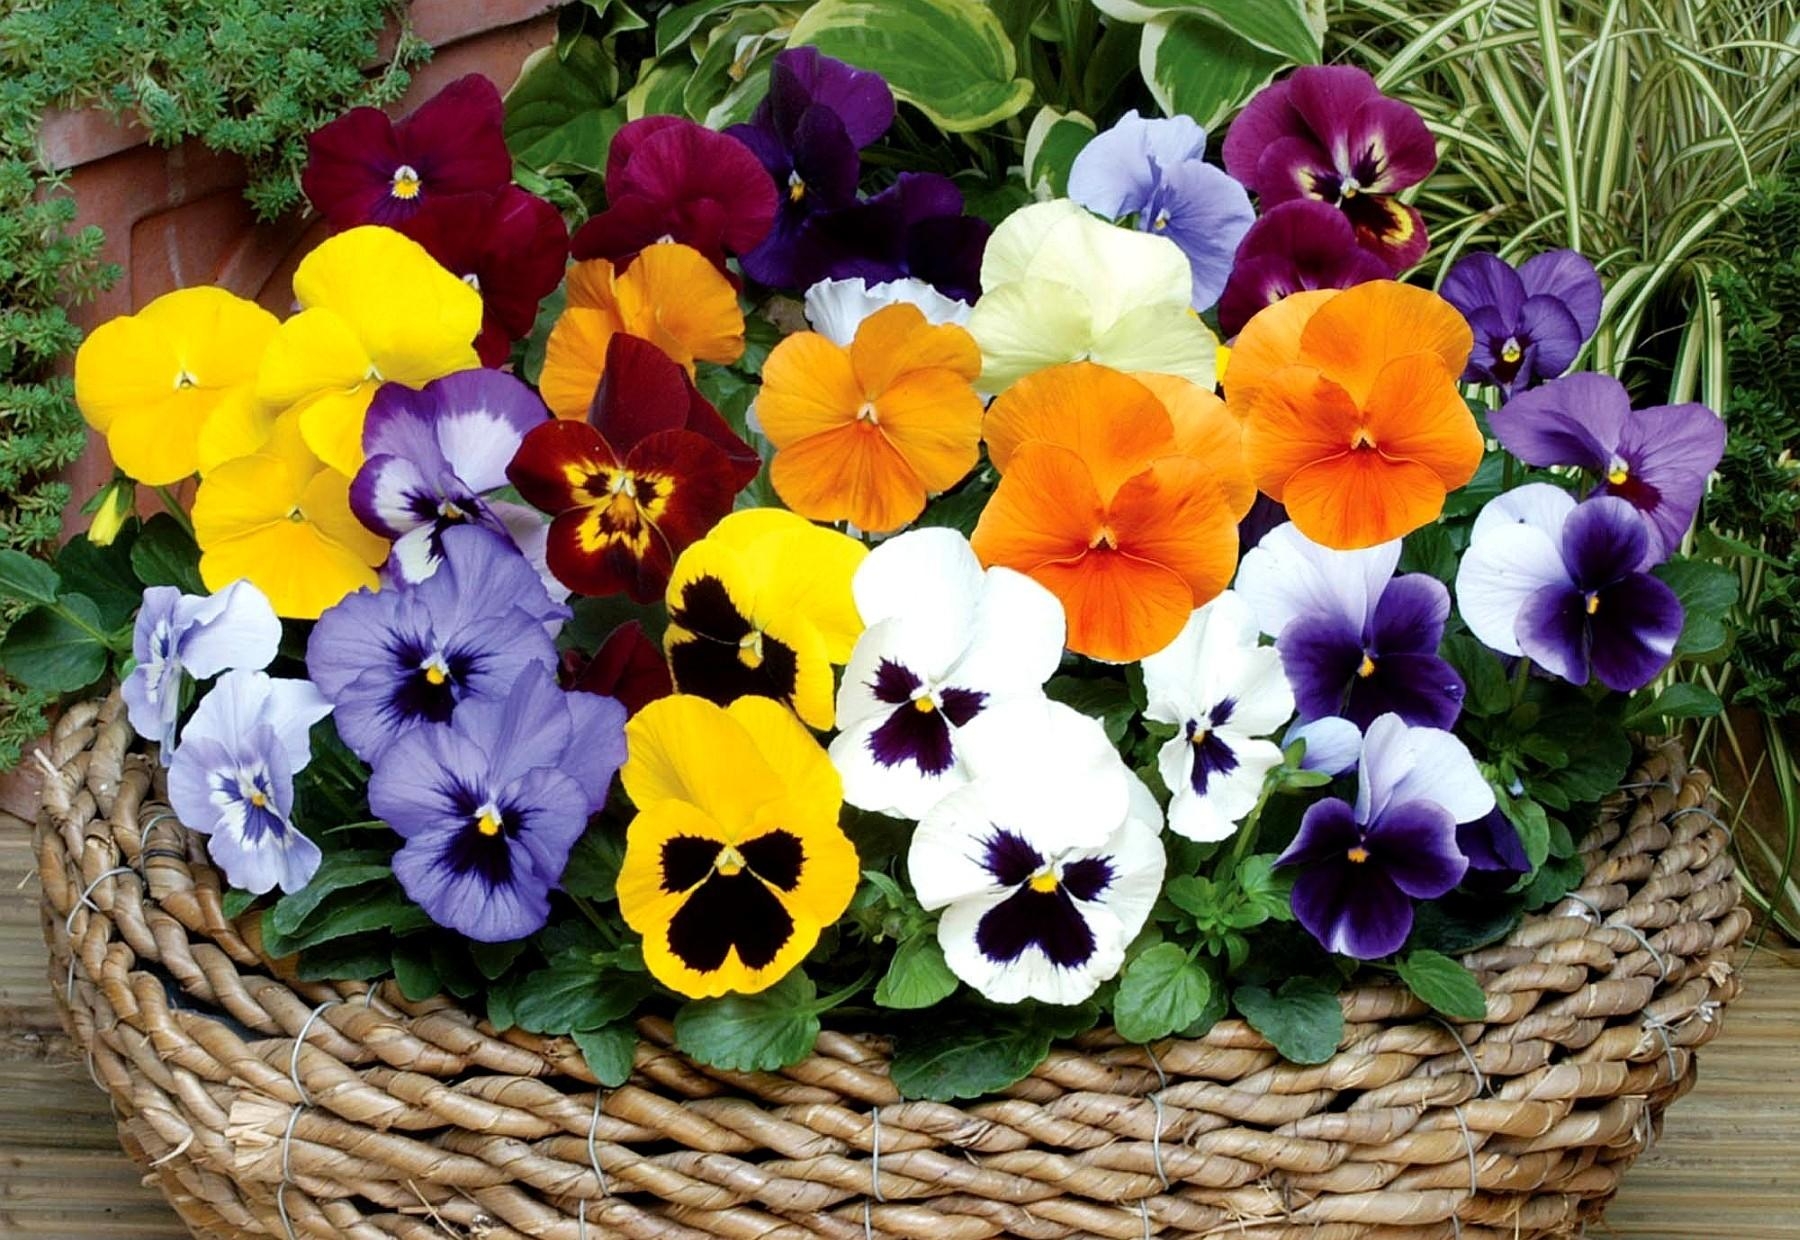 53161 download wallpaper flowers, pansies, bright, basket screensavers and pictures for free